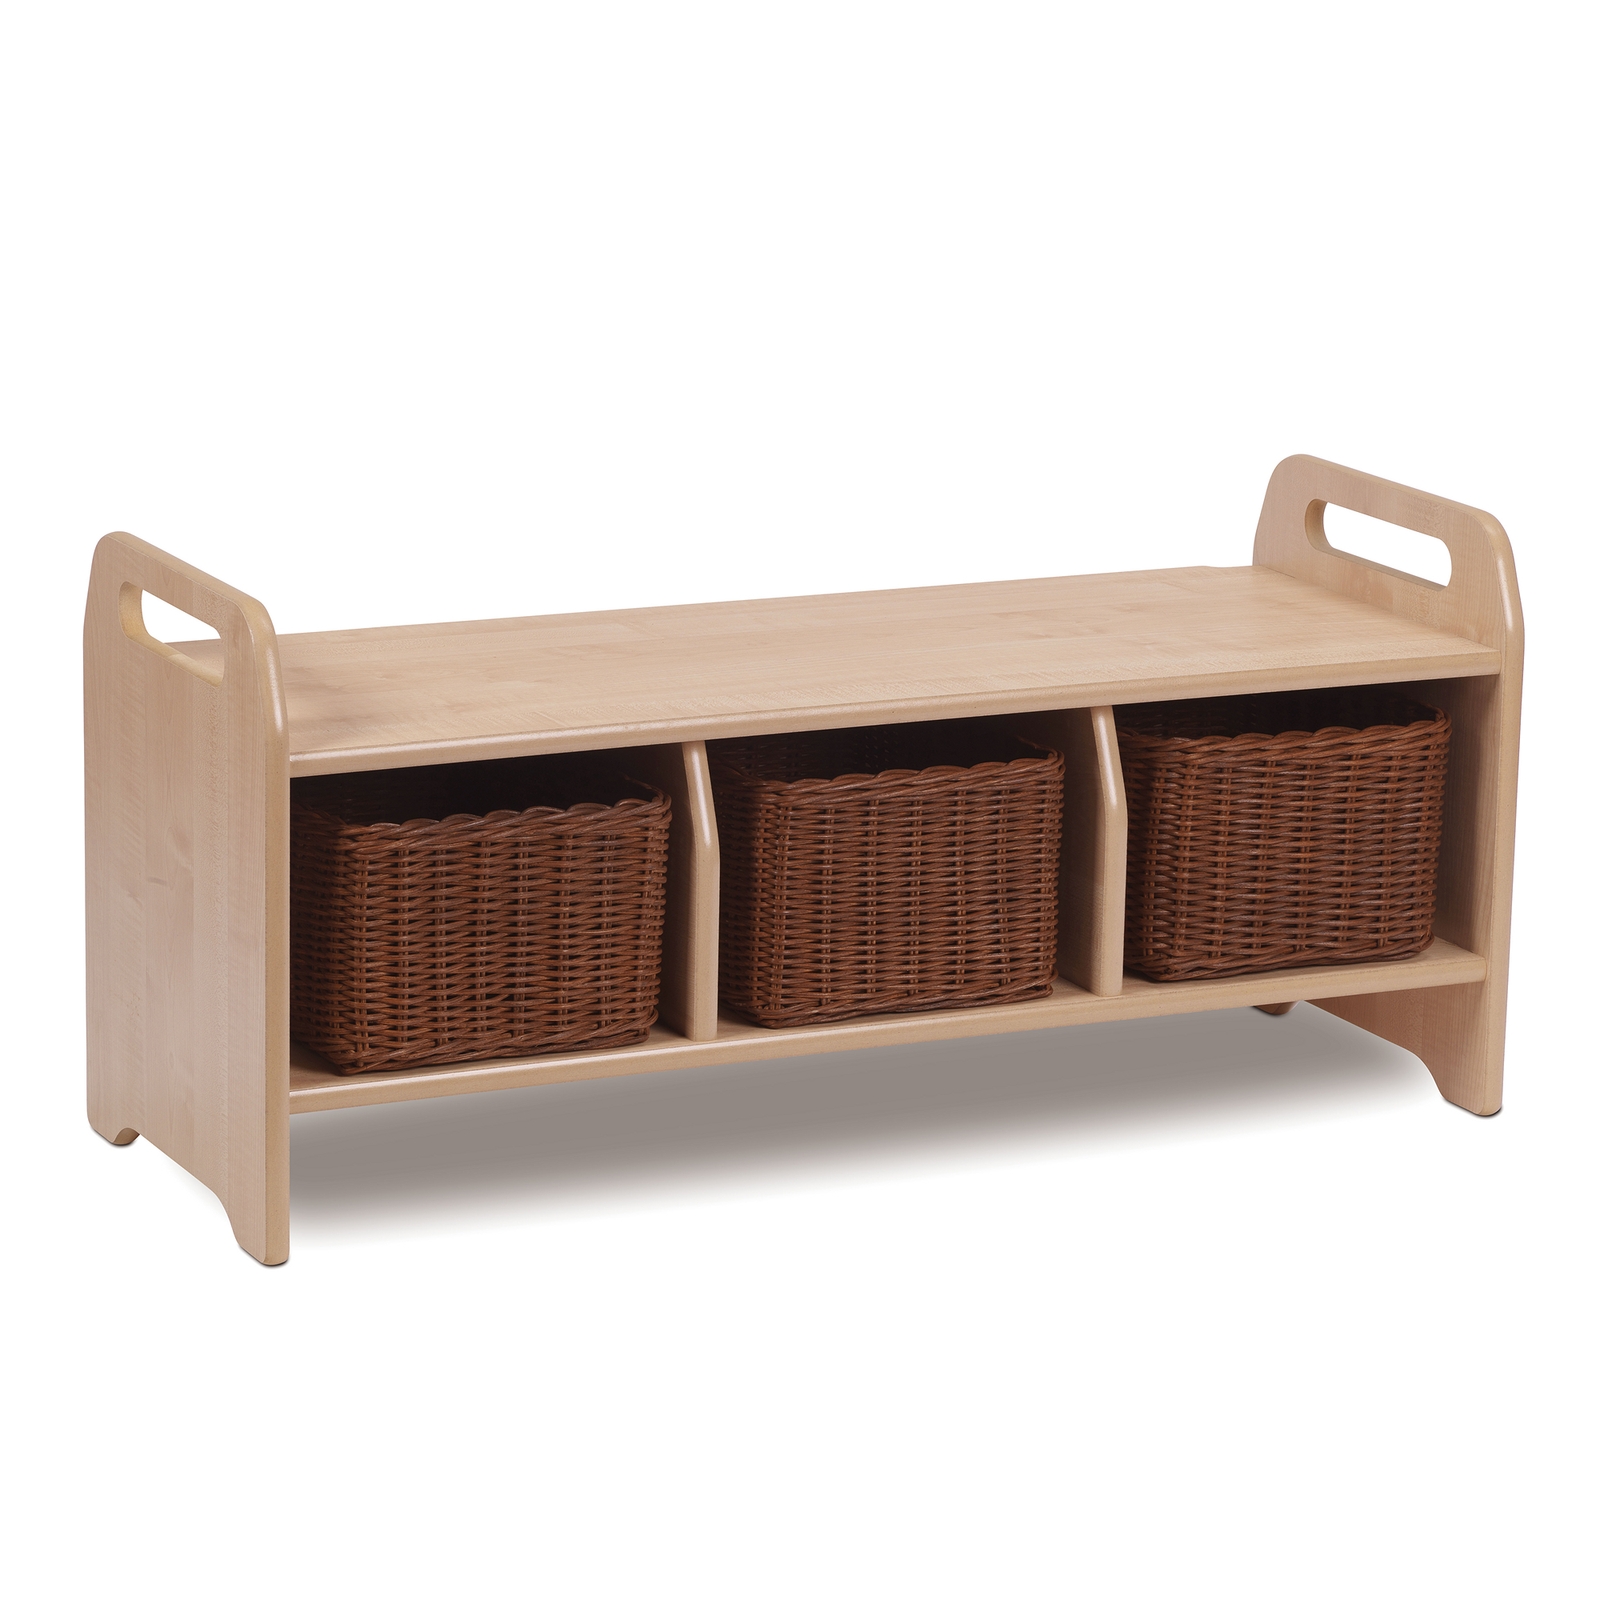 Playscapes Storage Bench - Large With 3 Baskets